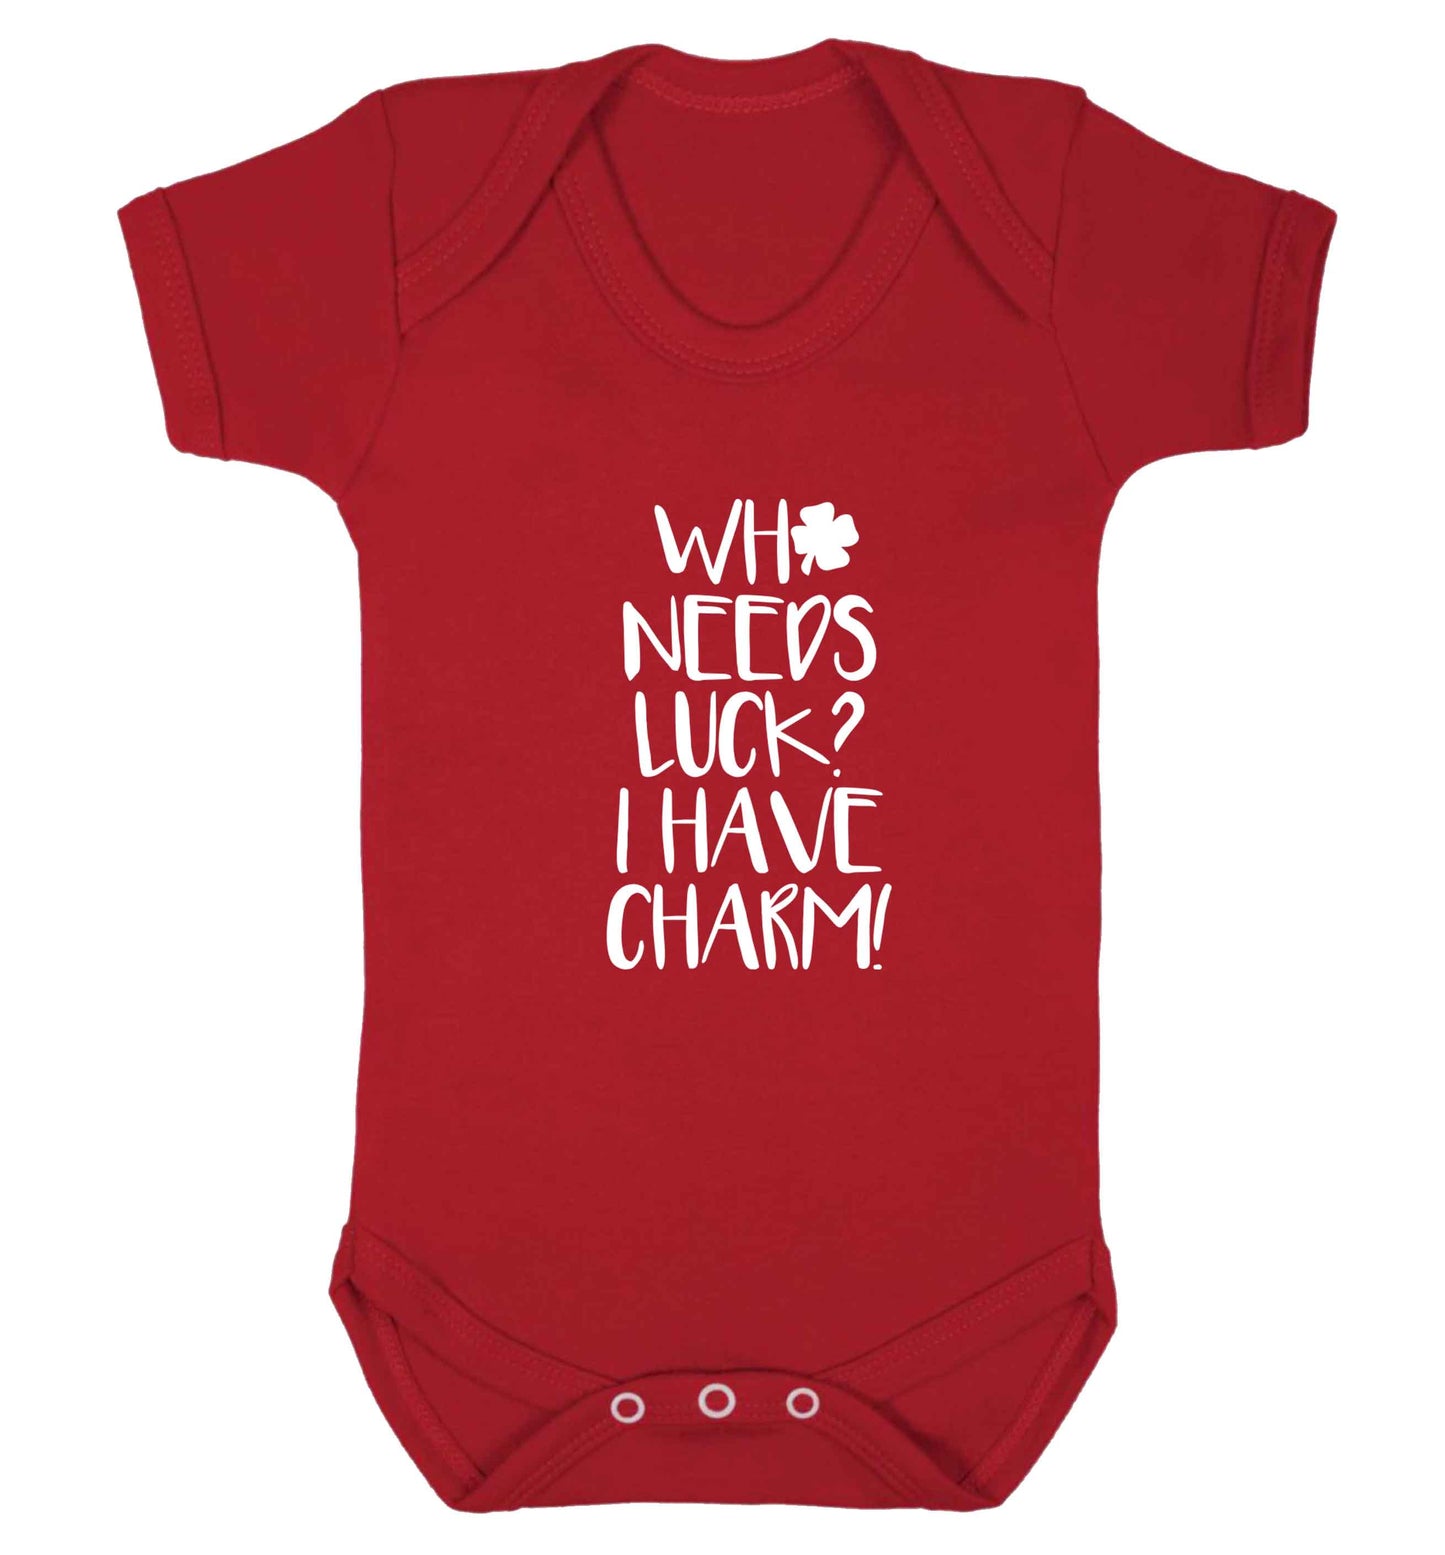 Who needs luck? I have charm! baby vest red 18-24 months